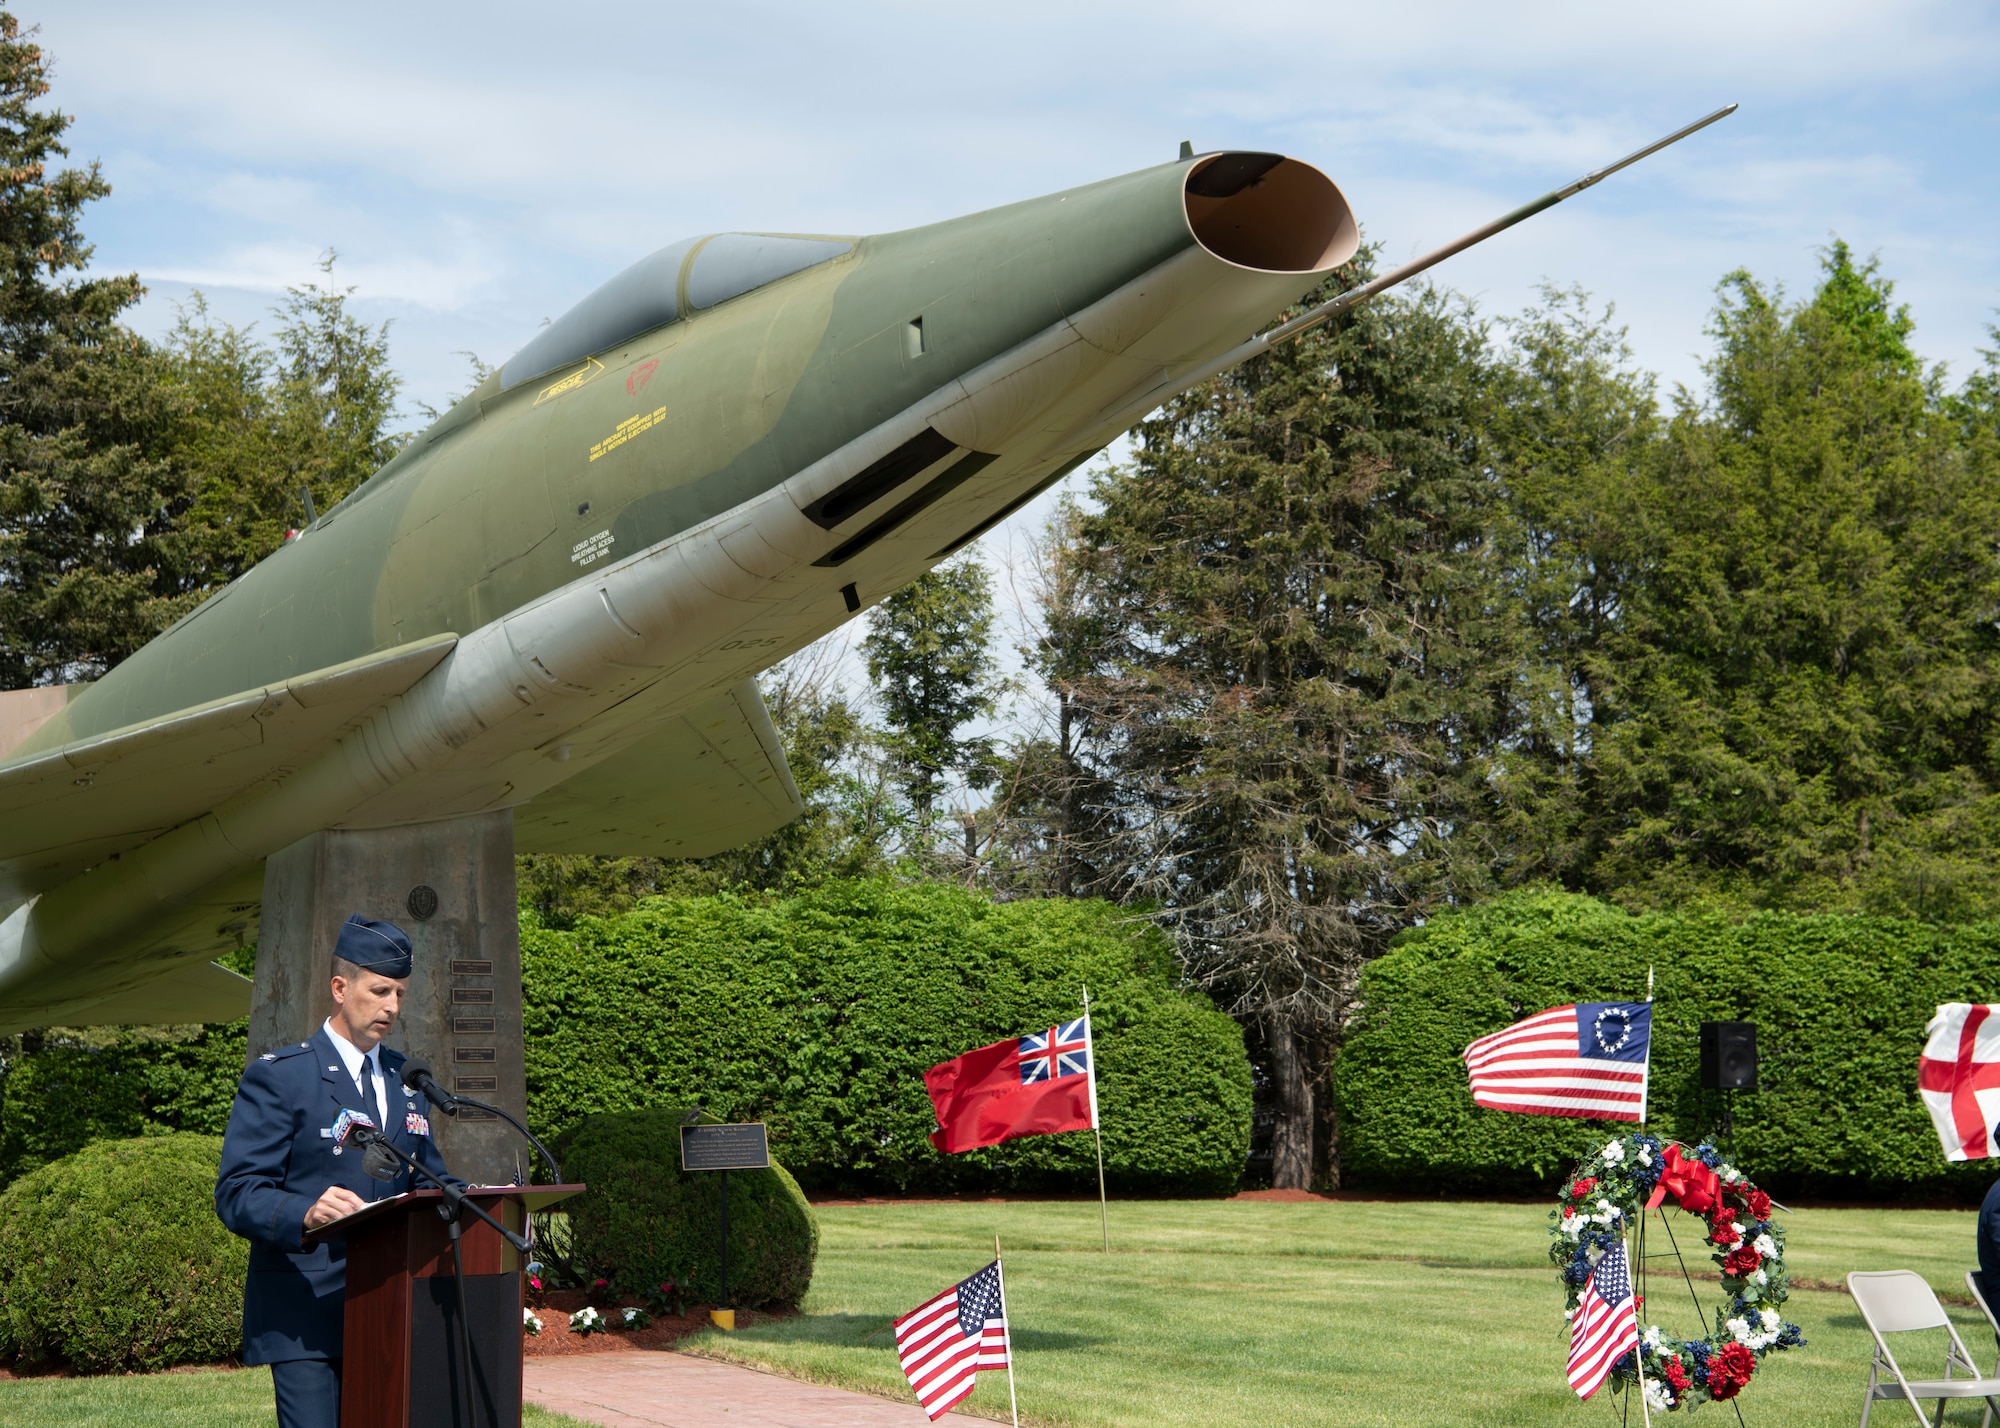 Barnestomers honor the 13 Airmen fallen in flight from the 104th Fighter Wing during the F-100 memorial rededication ceremony, May 20, 2022, at Barnes Air National Guard Base, Massachusetts. The F-100 monument was originally dedicated on May 17, 1987 by the 104FW Chief Master Sergeant’s Council. It continues to serve as a reminder of fallen Airmen’s impact on the unit.(U.S. Air National Guard photo by Staff Sgt. Hanna Smith)